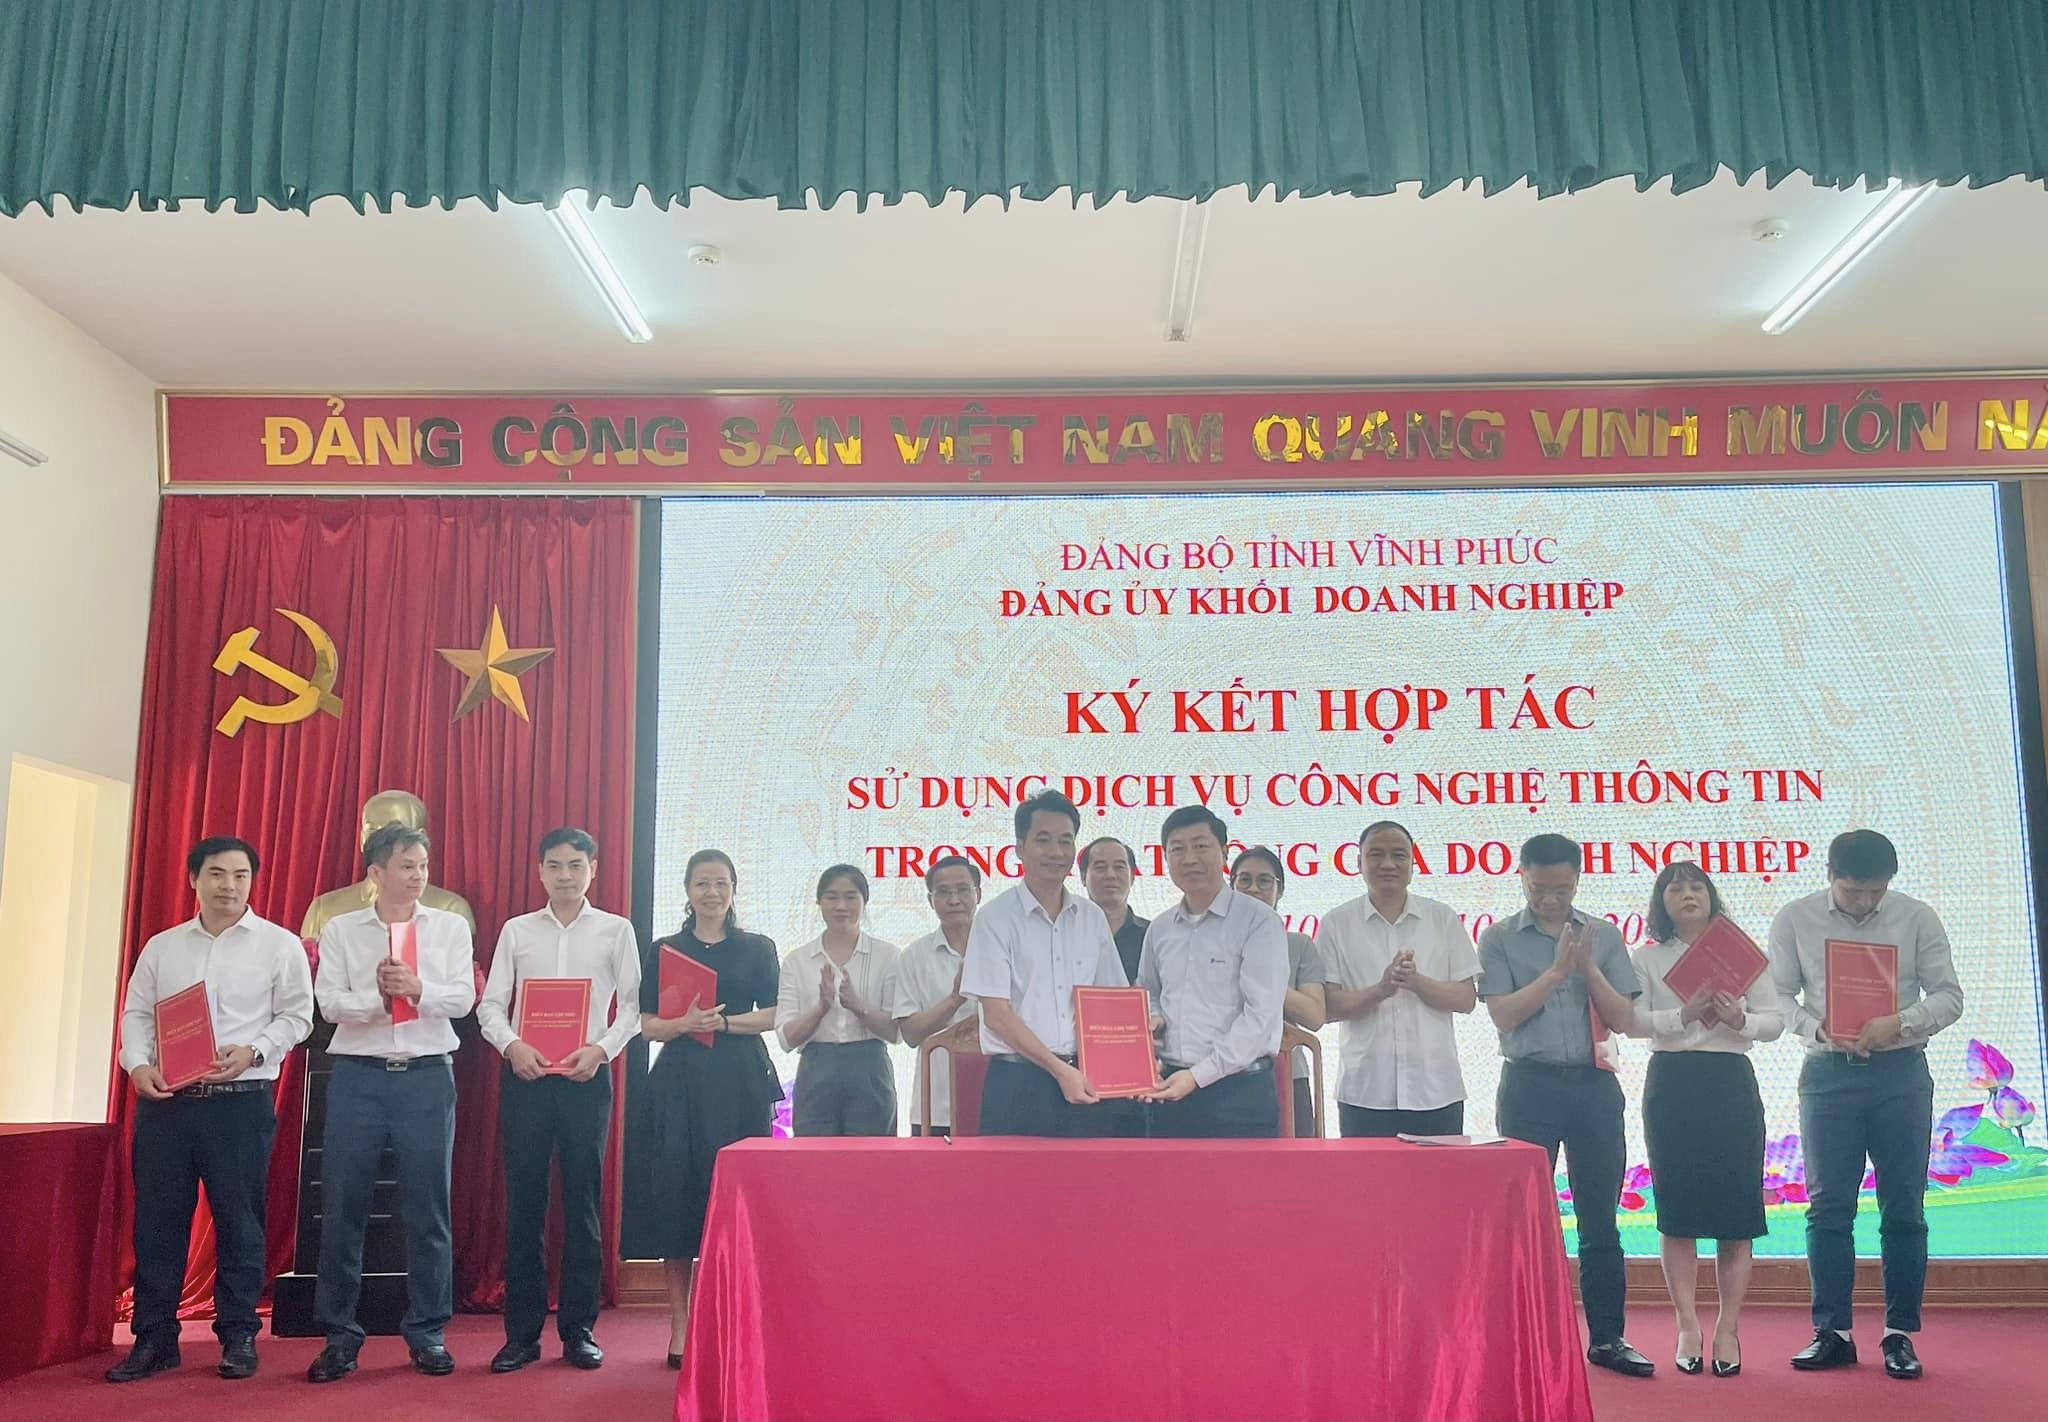 Businesses in Vinh Phuc sign cooperation agreements to use VNPT's IT services